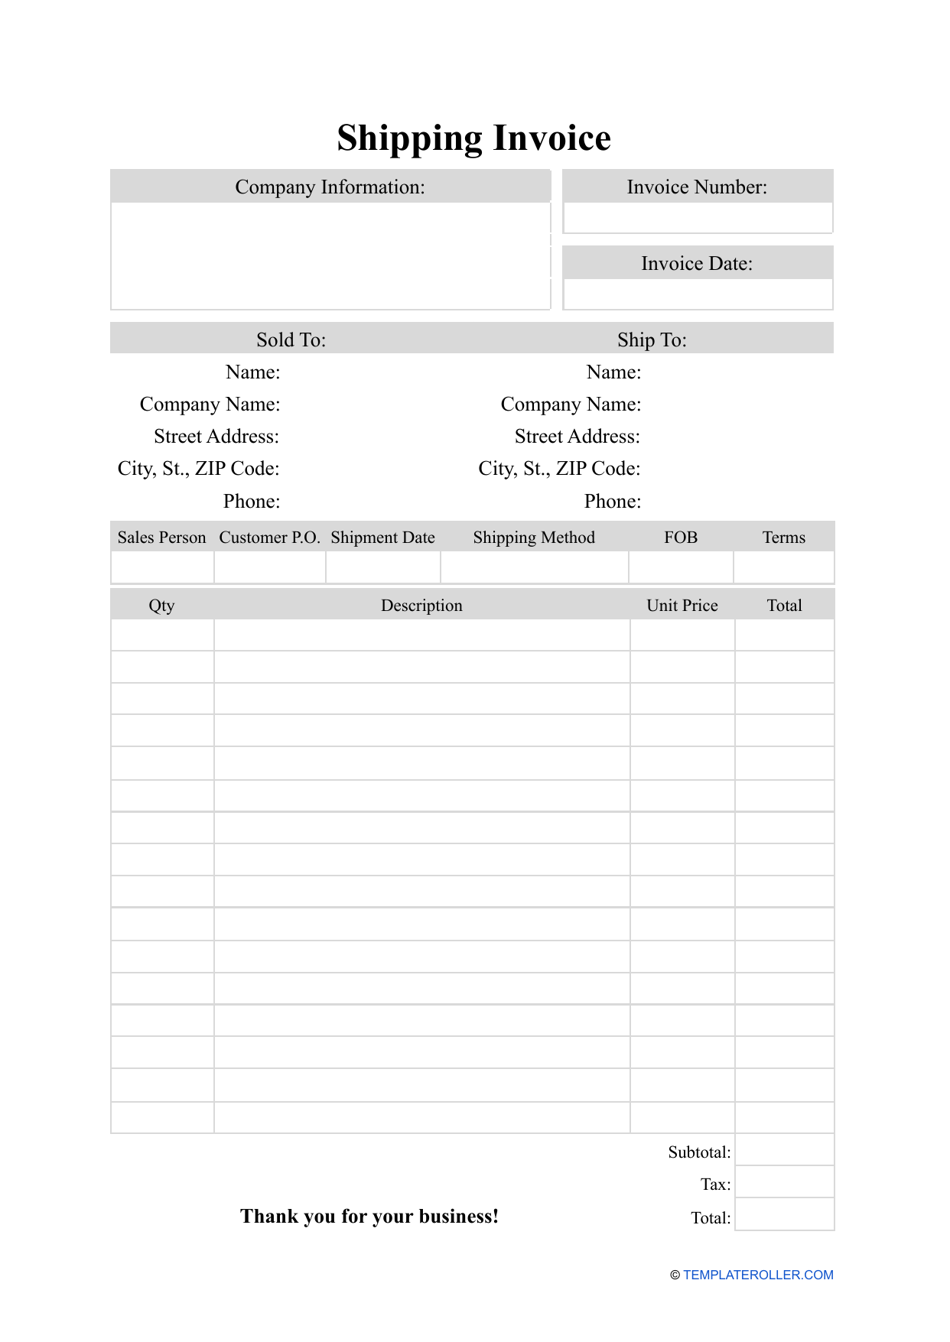 Shipping Invoice Template, Page 1